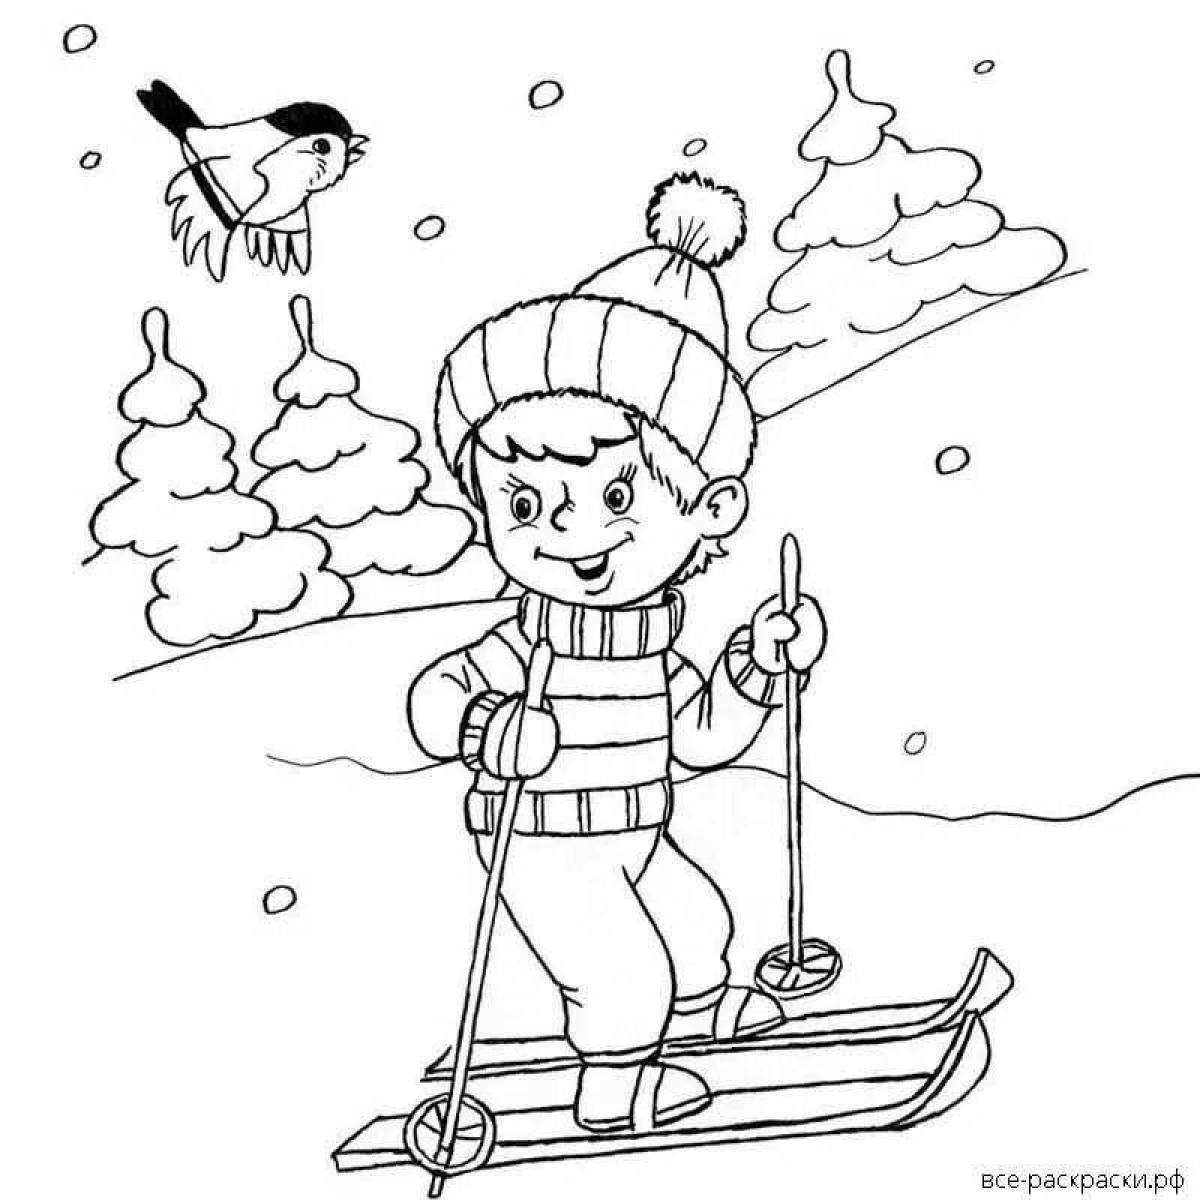 Sparkling winter fun coloring page